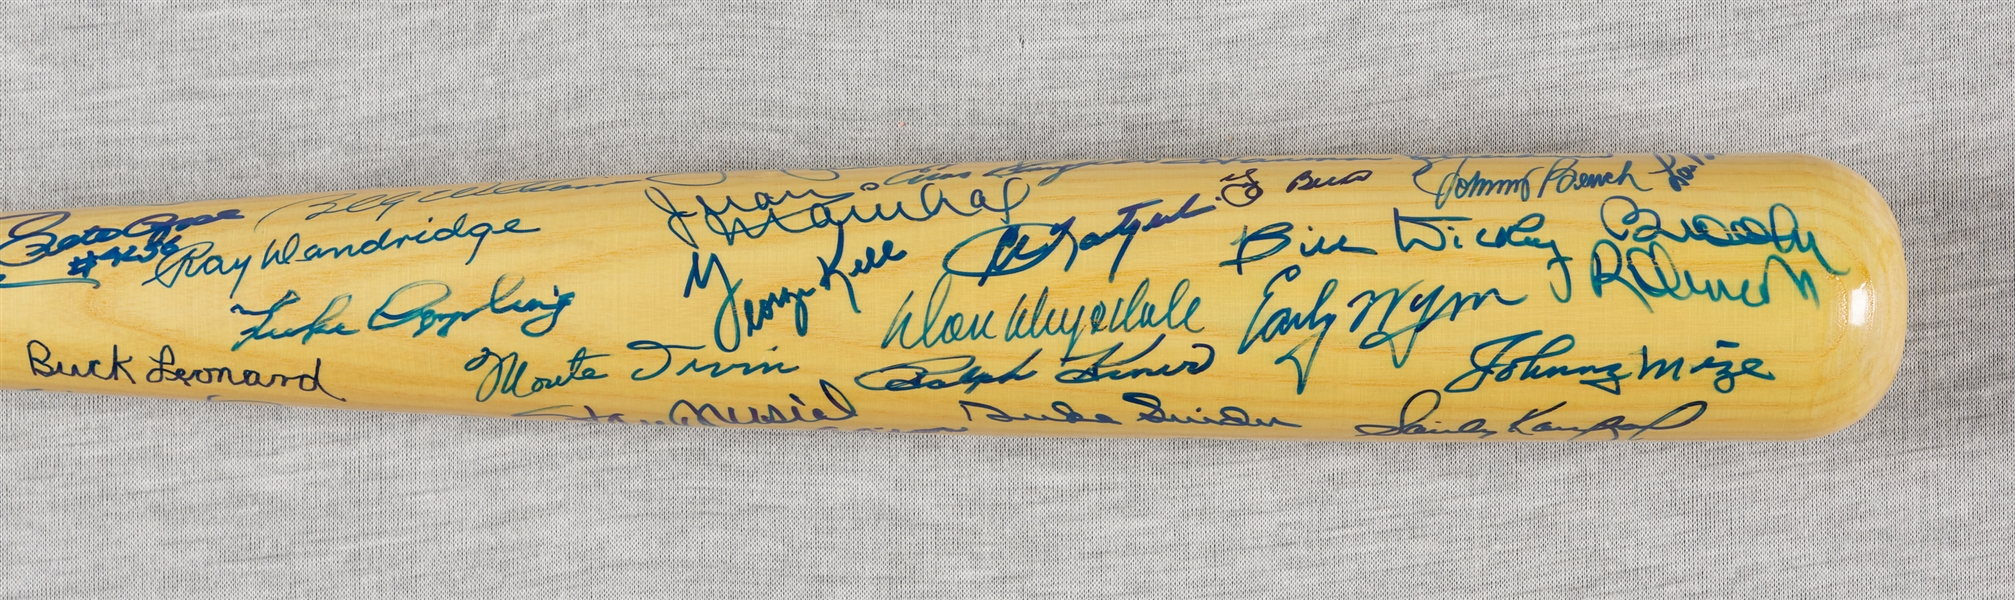 HOFer Multi-Signed Cooperstown Bat with Mantle, DiMaggio, Koufax, Aaron, Mays (50+) (JSA)